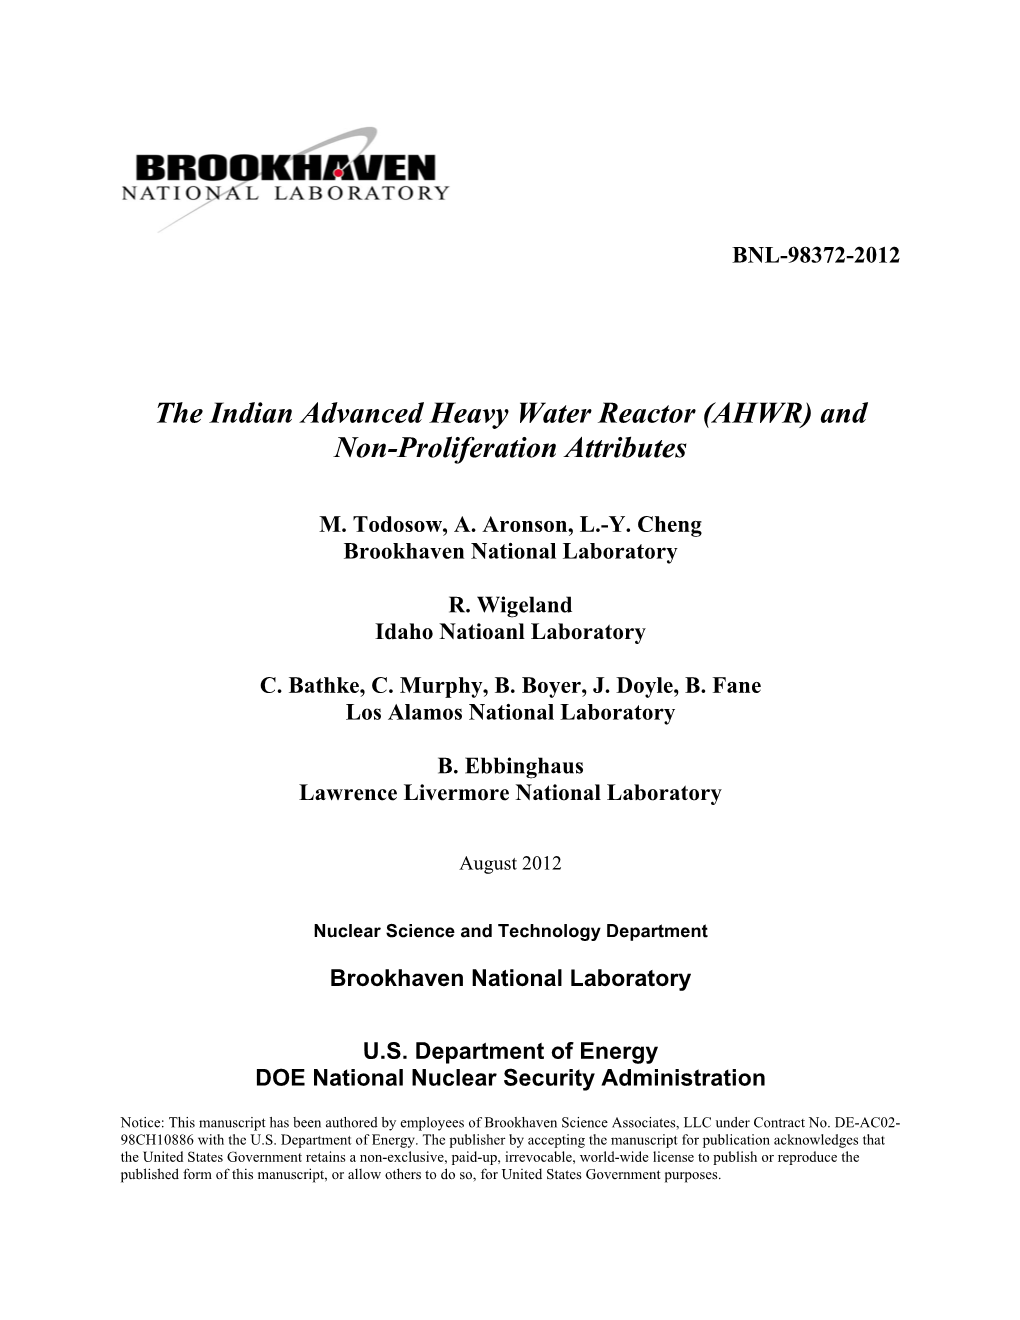 The Indian Advanced Heavy Water Reactor (AHWR) and Non-Proliferation Attributes